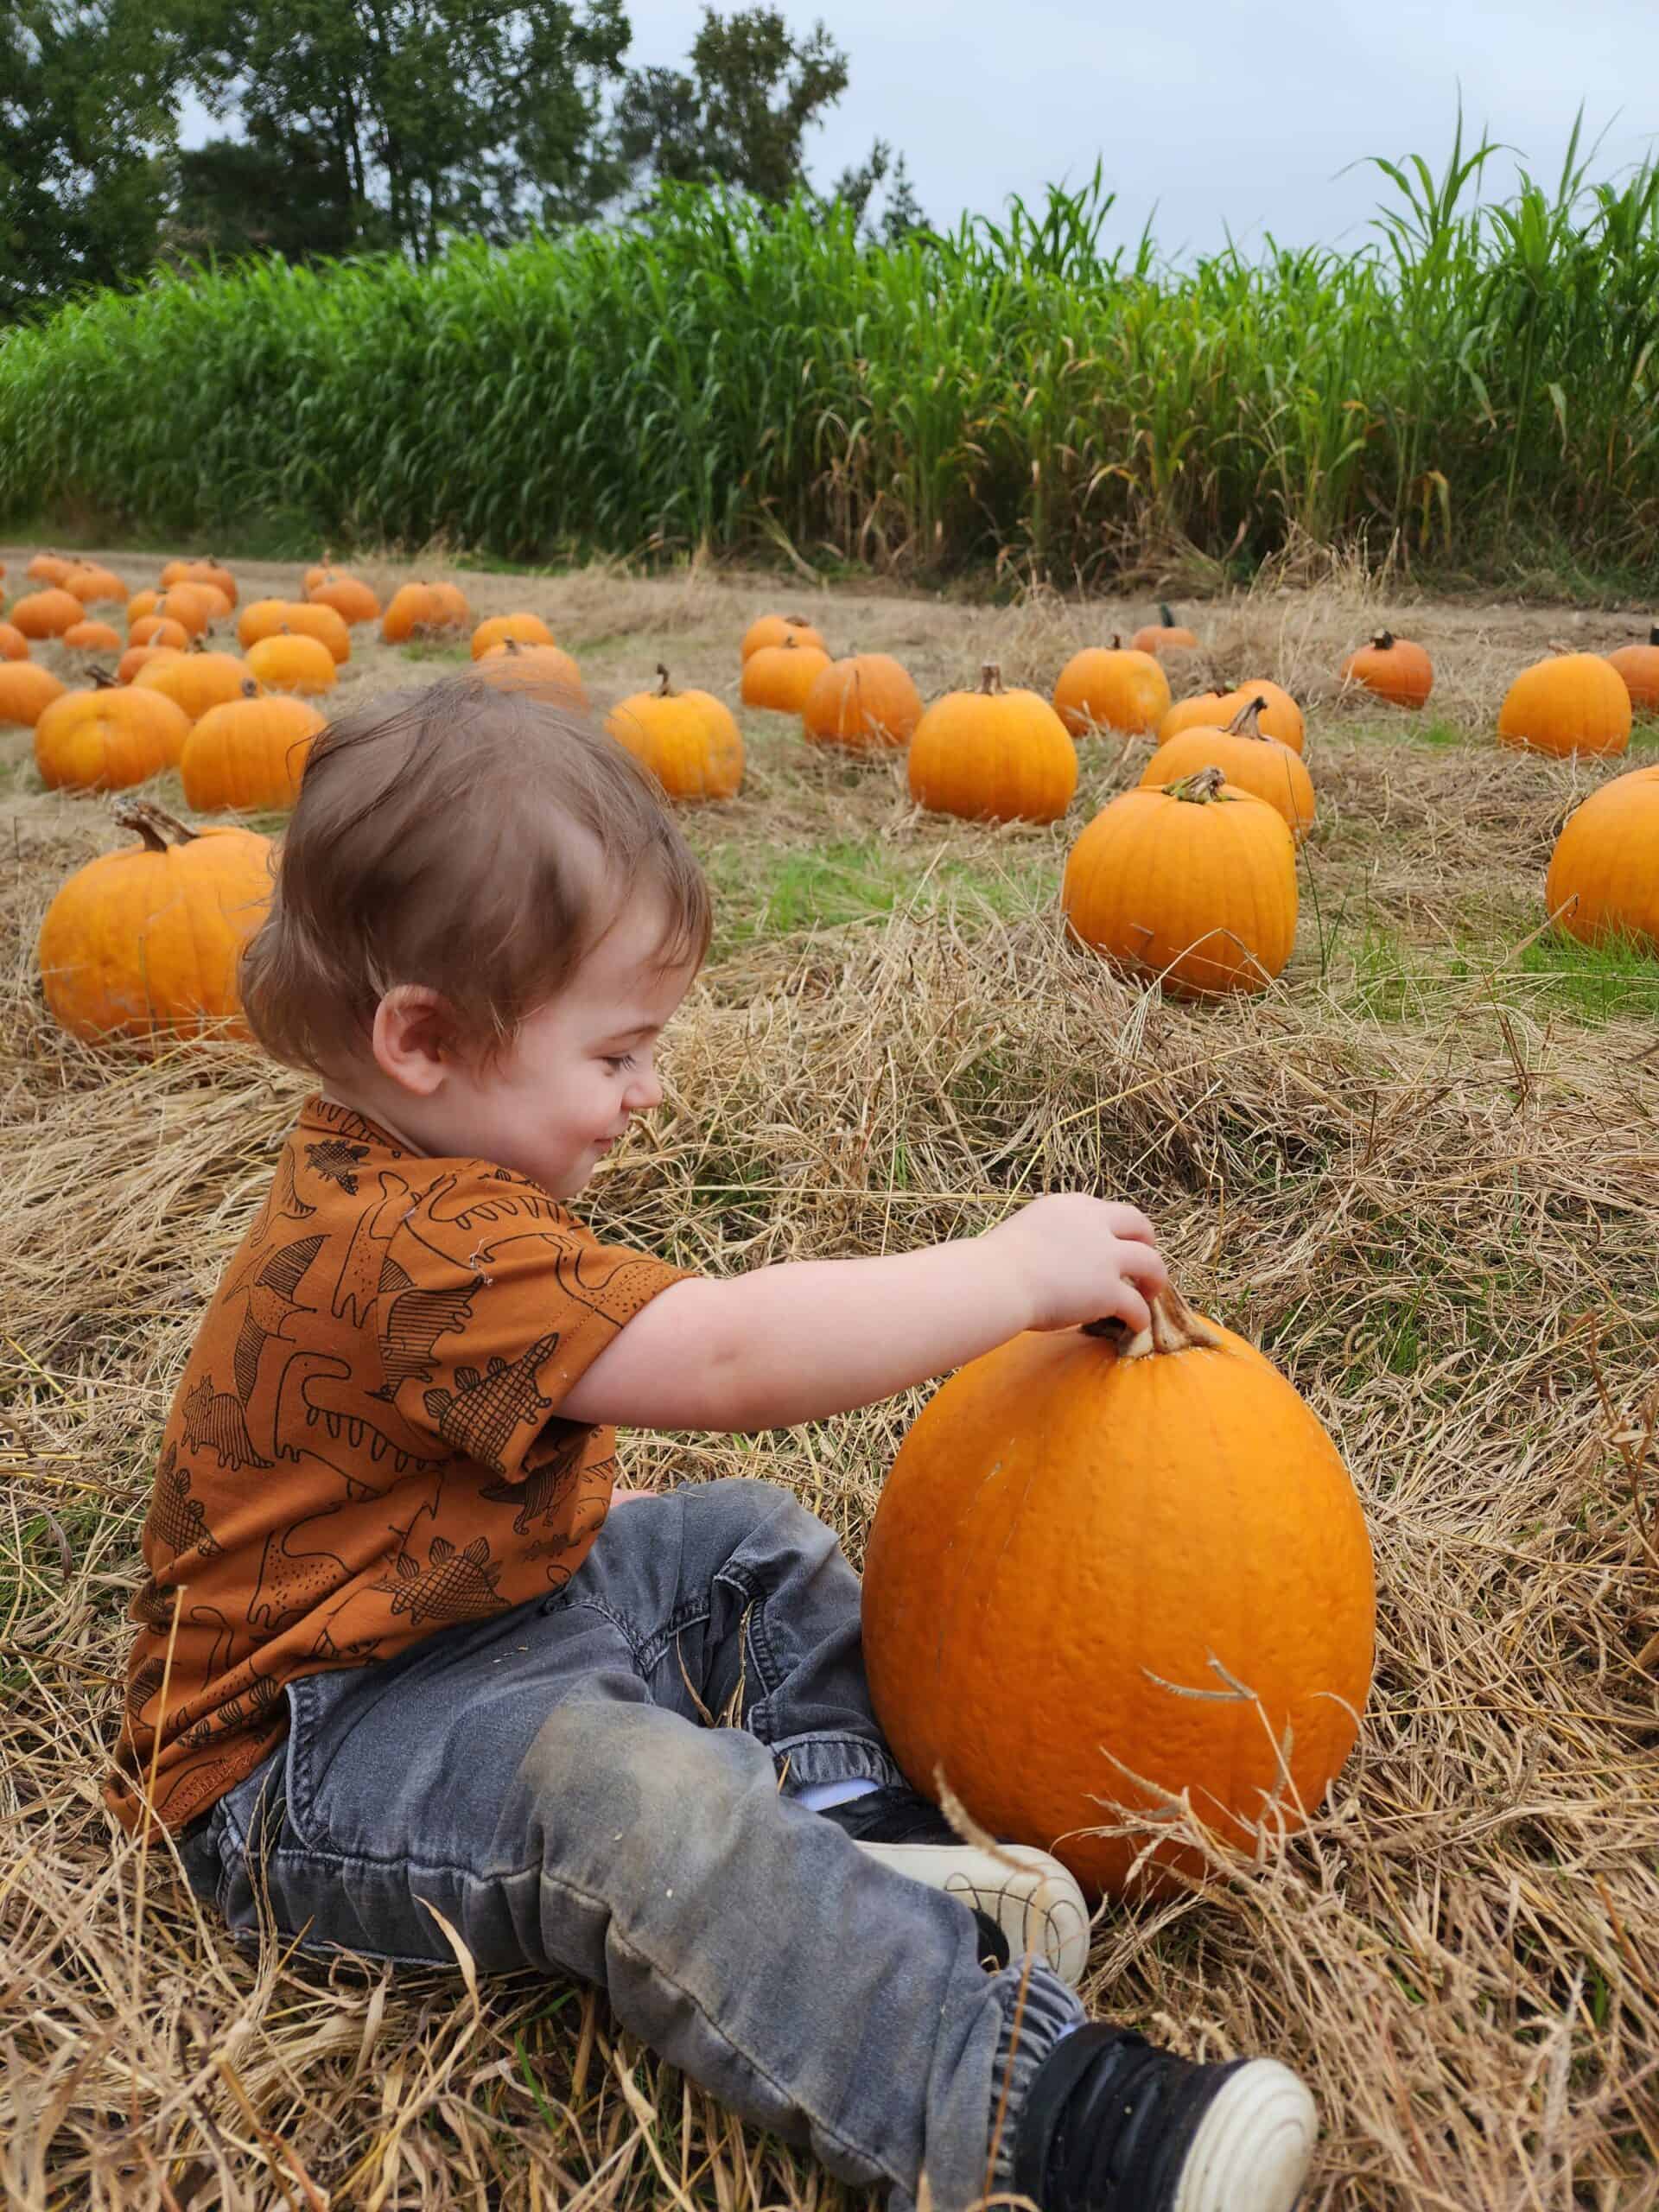 A toddler in a brown shirt with a dinosaur print sits among scattered pumpkins on a hay-covered field, gently touching a pumpkin, with cornstalks towering in the background